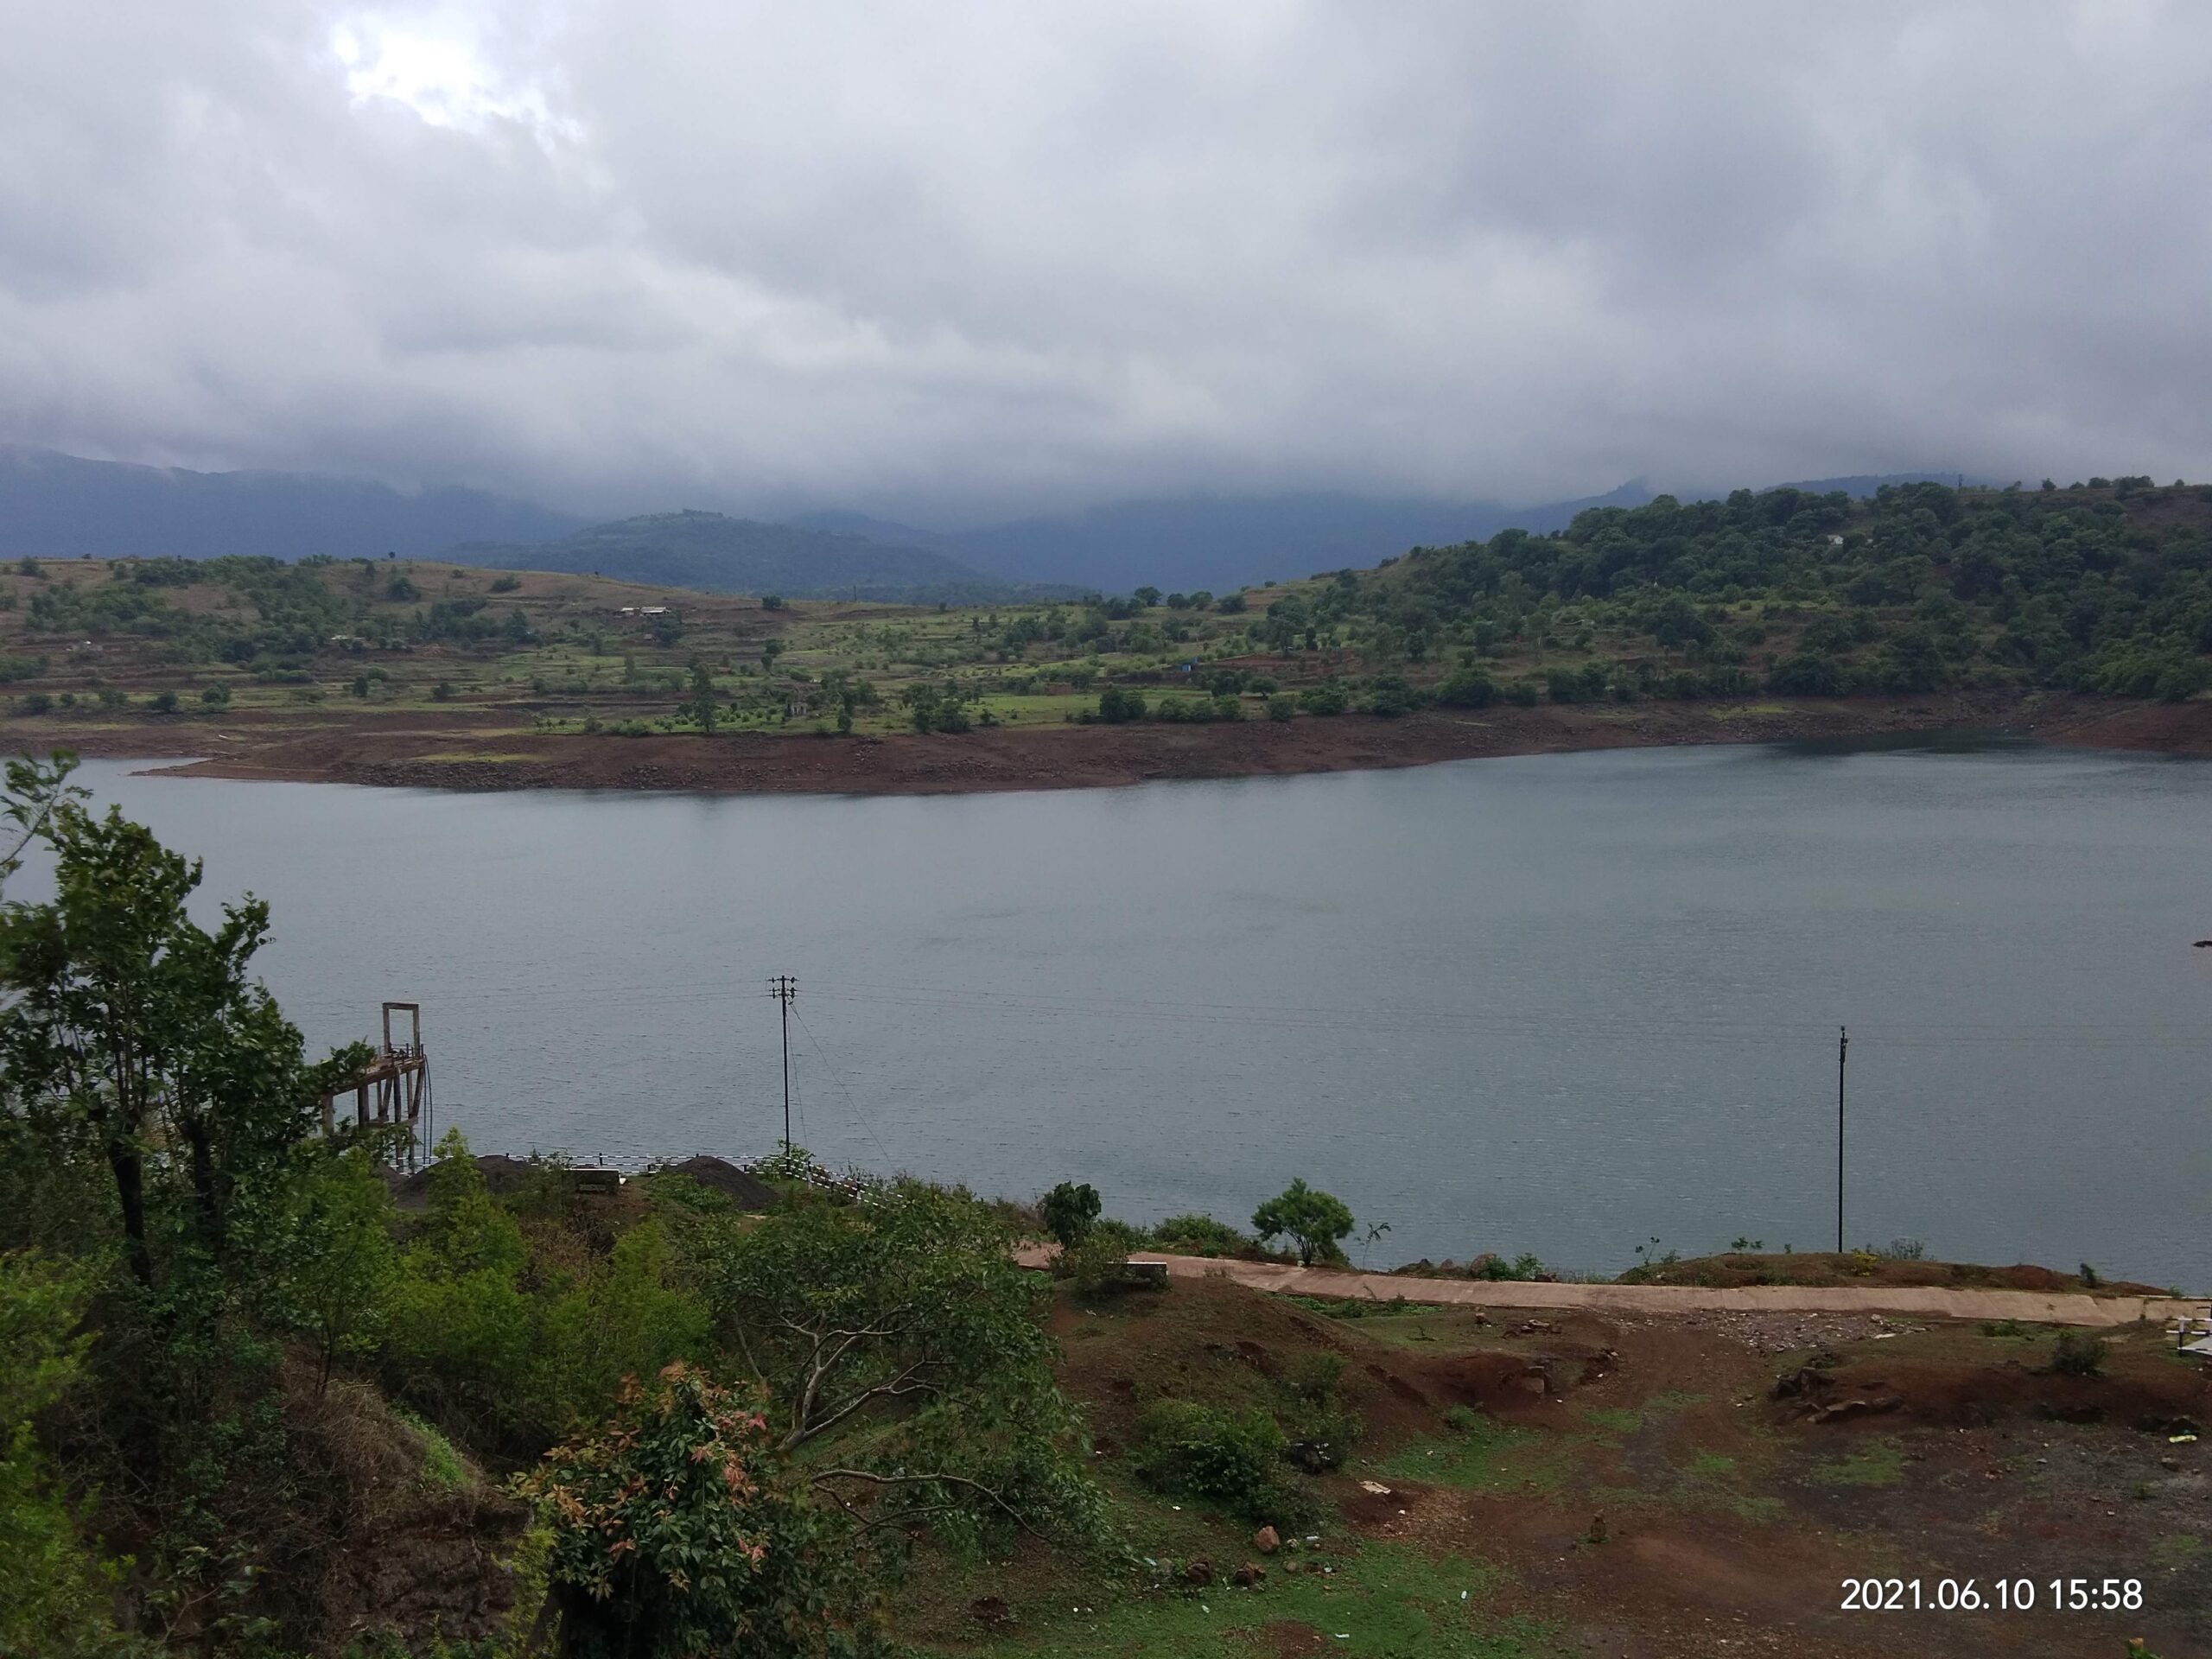 BHANDARDARA LAKE - ONE OF THE BEST PLACES TO VISIT IN BHANDARDARA